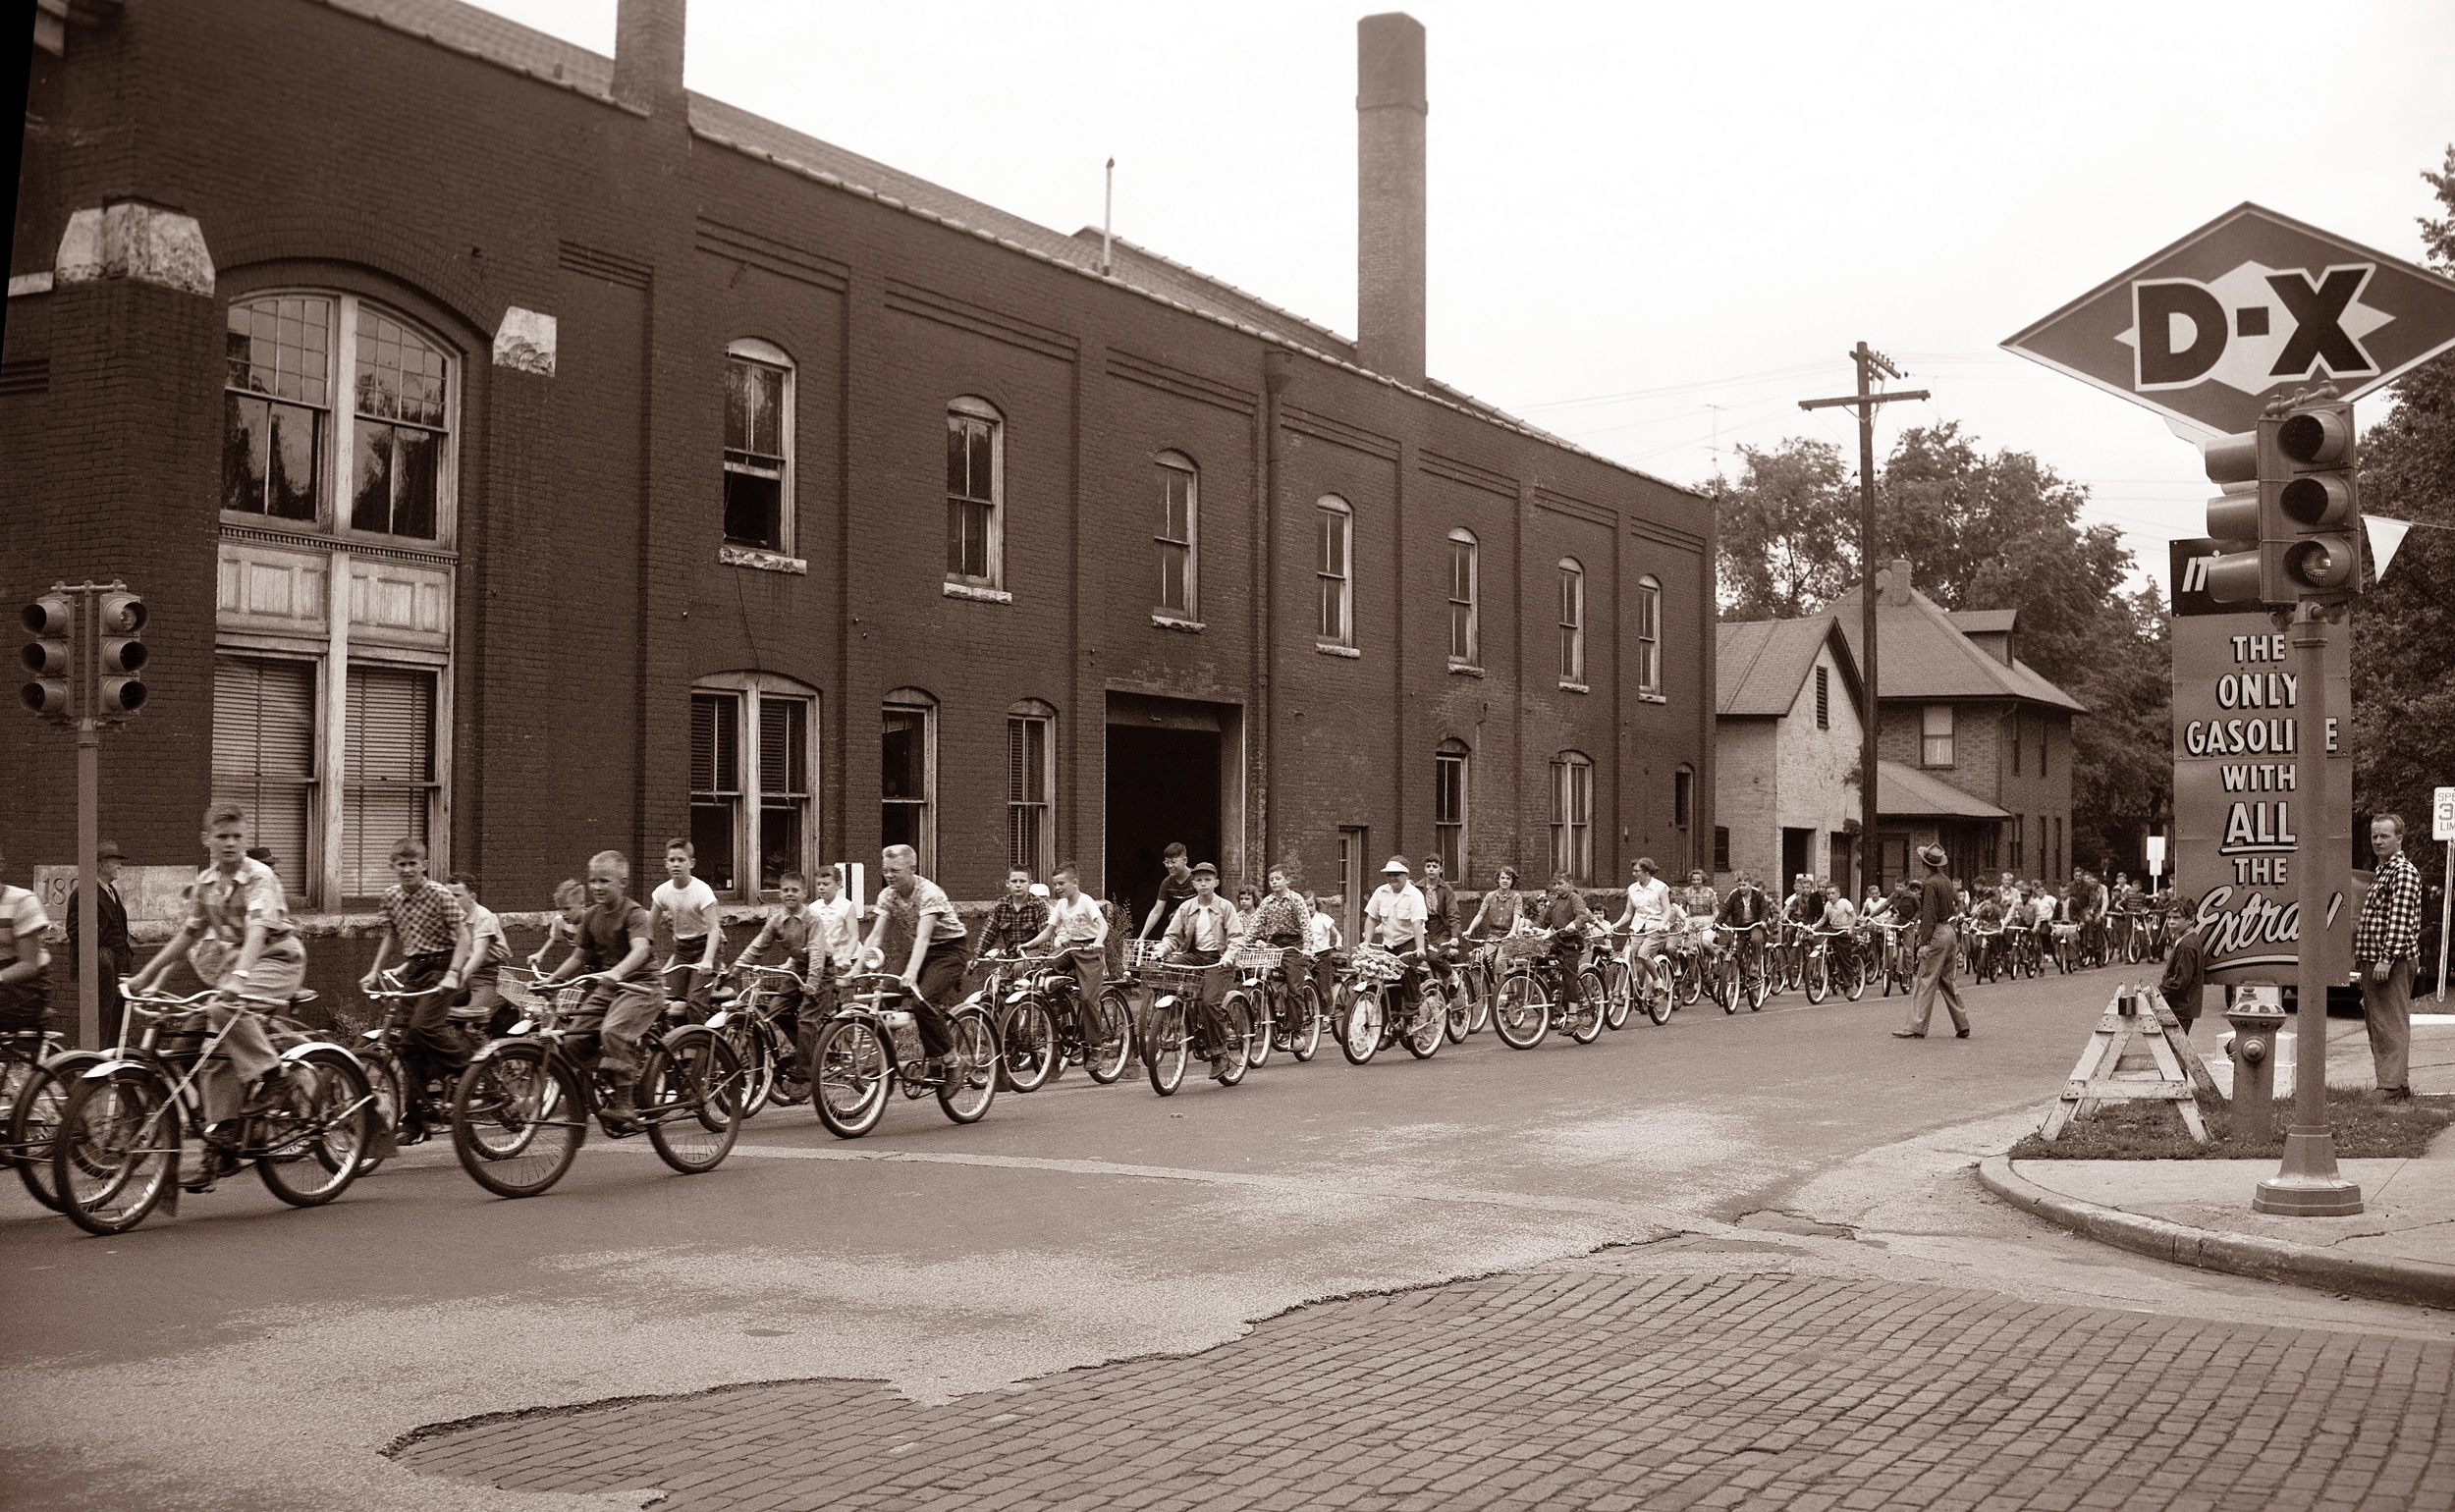 A companion photo to one posted earlier here, taken during a bicycle registration event in Lafayette, Indiana in 1954. Wally and The Beav are surely in there somewhere. View full size.